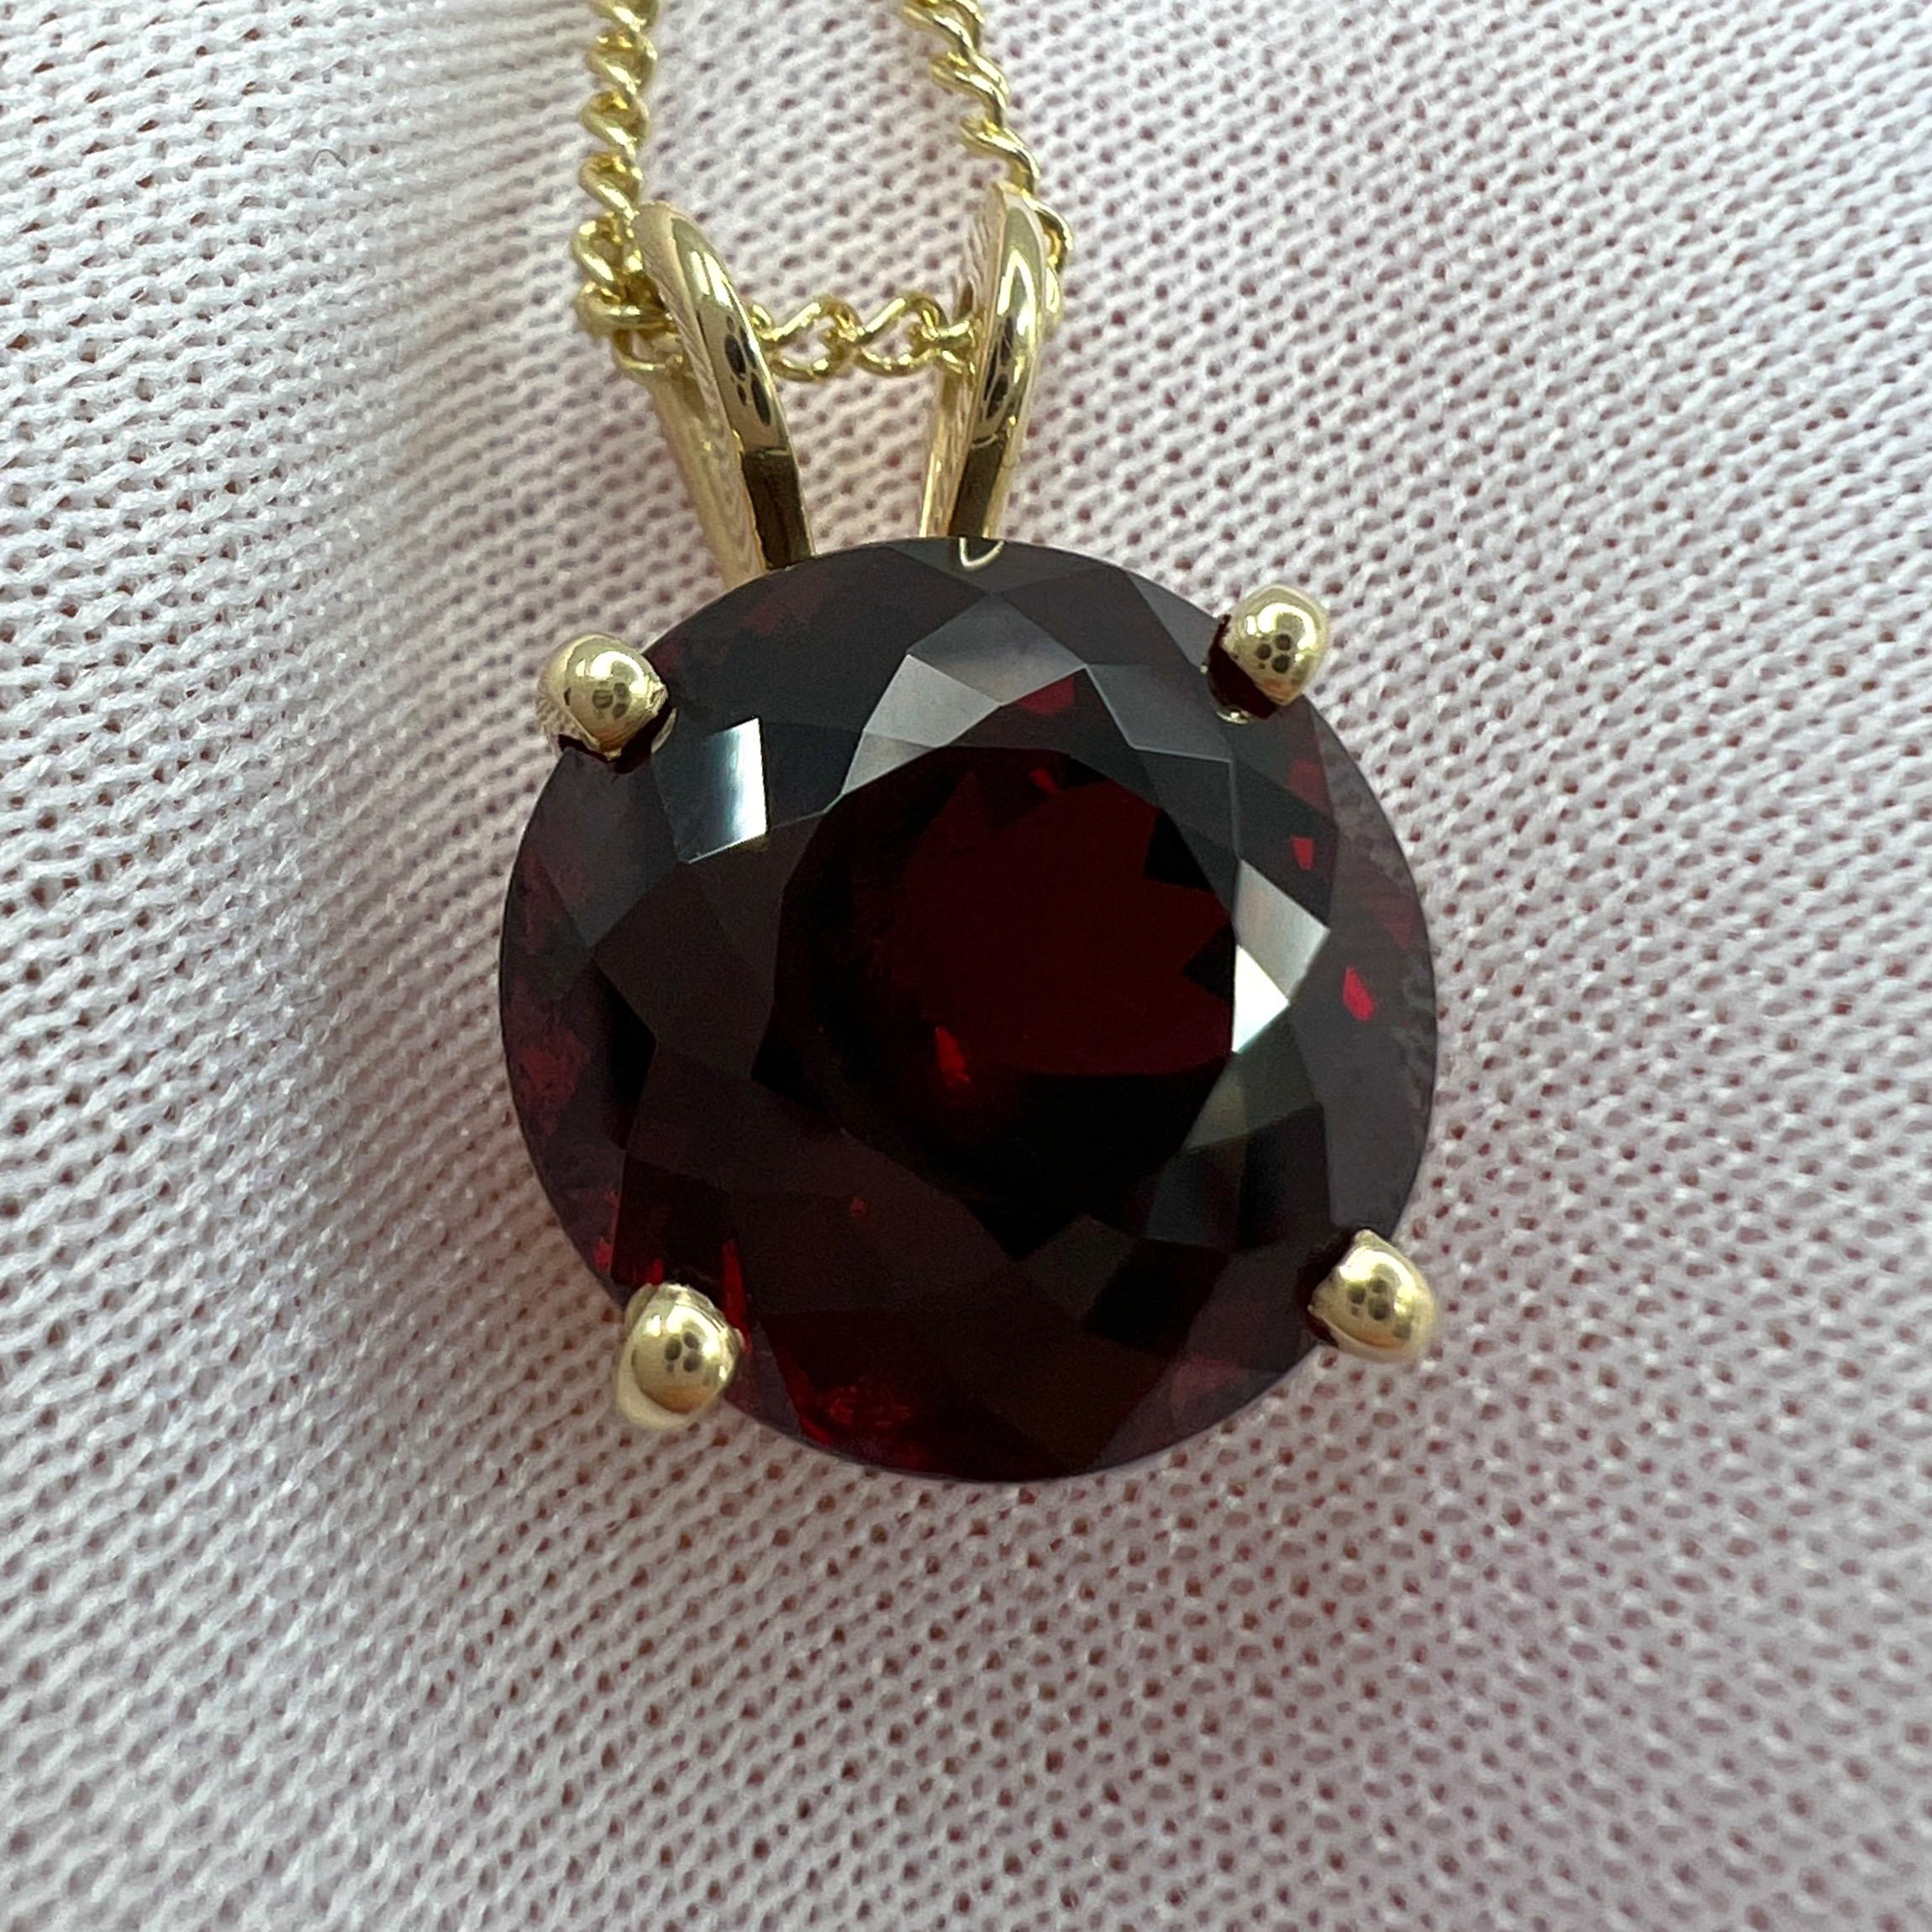 Natural Vivid Red Rhodolite Garnet Round Cut Yellow Gold Pendant Necklace.

Large 8.88 carat fine red garnet set in a beautiful 9k yellow gold solitaire pendant with a split bail.

This stone has an excellent fancy round brilliant cut and excellent